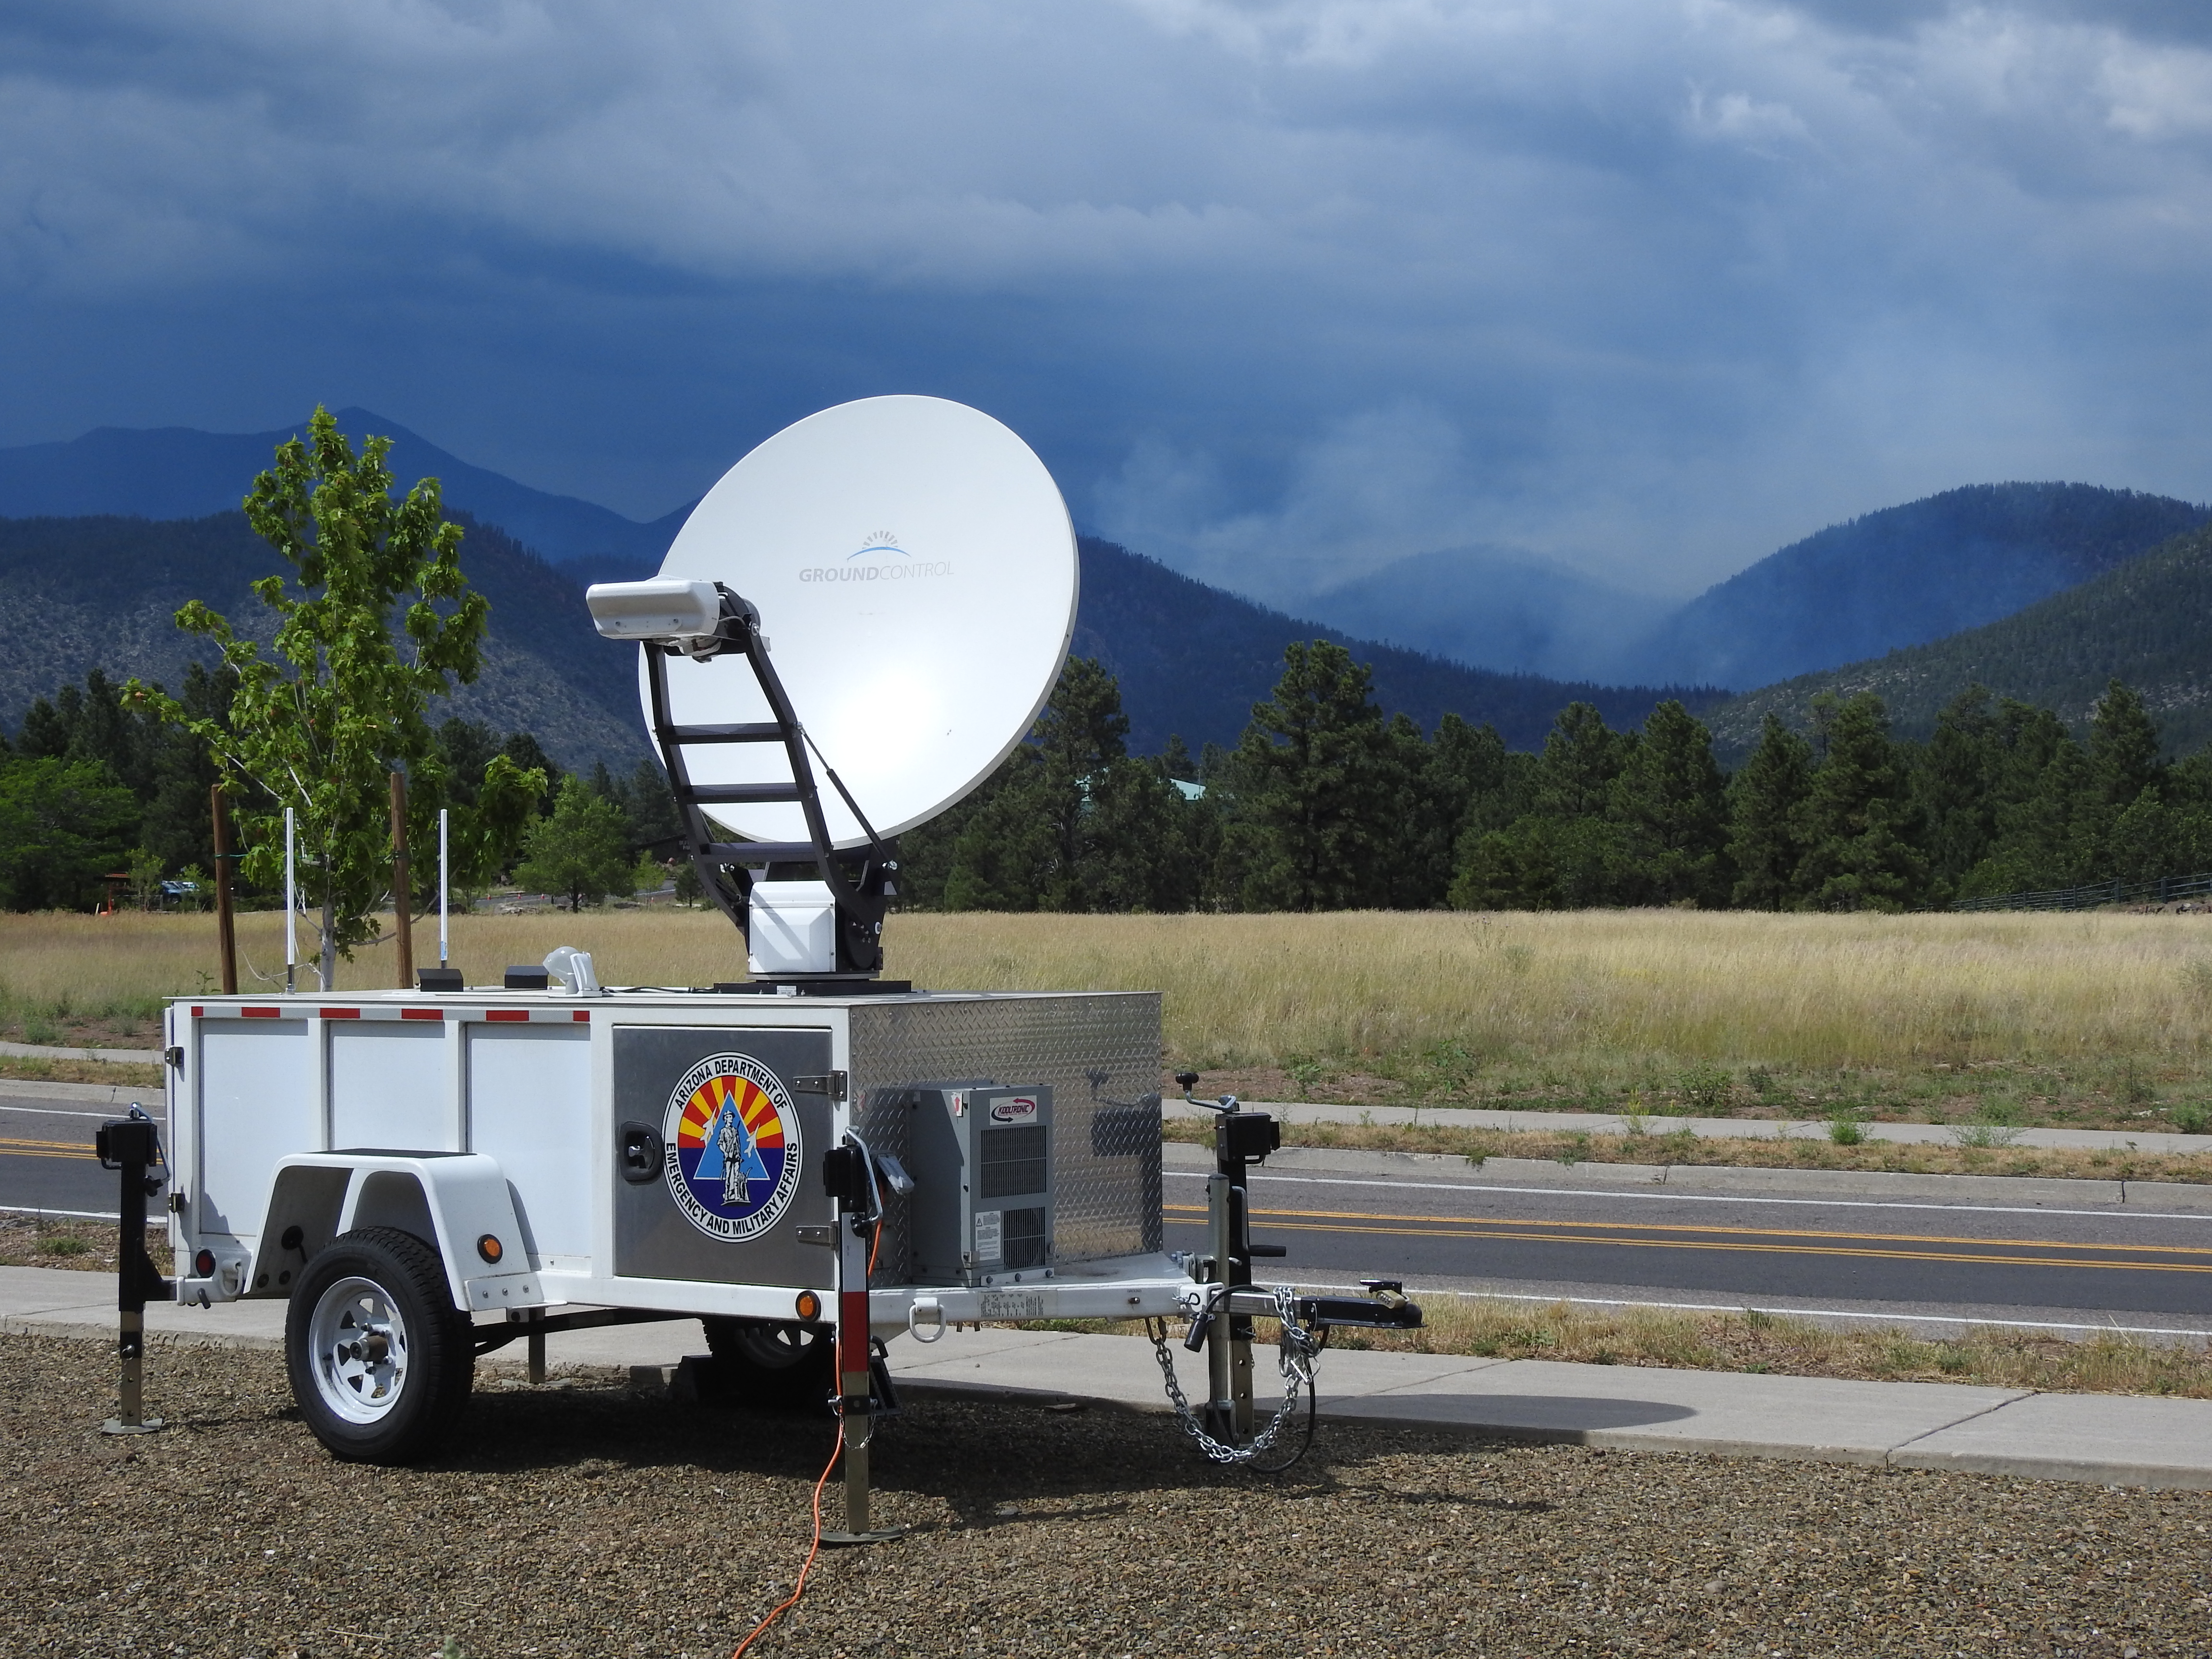 Photo of the Statewide Interoperable Communications also known as the "Jackrabbit",   parked pn the side of the road near the wildfire across the mountains.